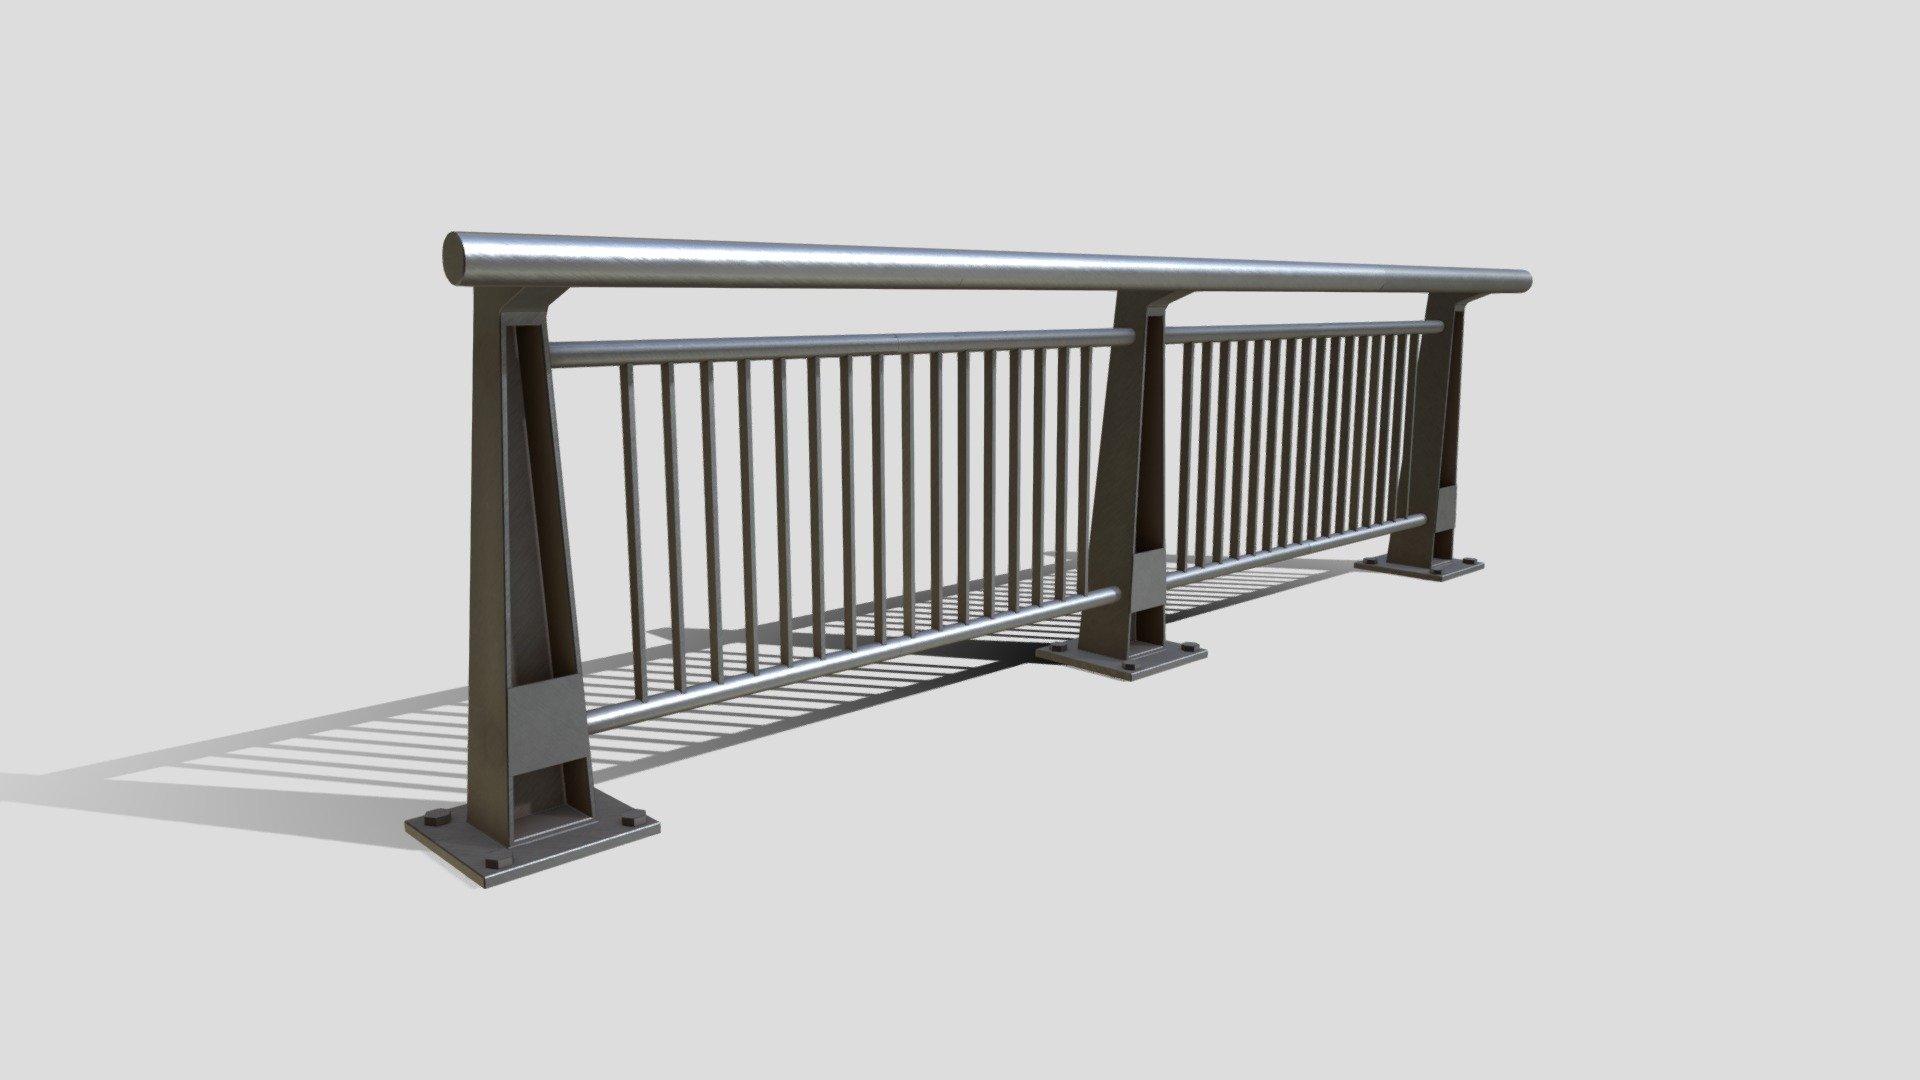 Hi all,

This is PBR Bridge Barrier pack created in Blender. It includes 3 different models in real world scale (124cm high). The middle piece can be duplicated to increase the length of the barrier.

The product has 812 polygons.

It comes in the following formats:
.blend
.fbx
.obj
.dae

The blender file has the shaders set up, so it's ready to render using Cycles. The title image is not included.
It also comes with set of 4K .png maps:
base color
roughness
normal
metallic - Bridge Barrier - Buy Royalty Free 3D model by kambur 3d model